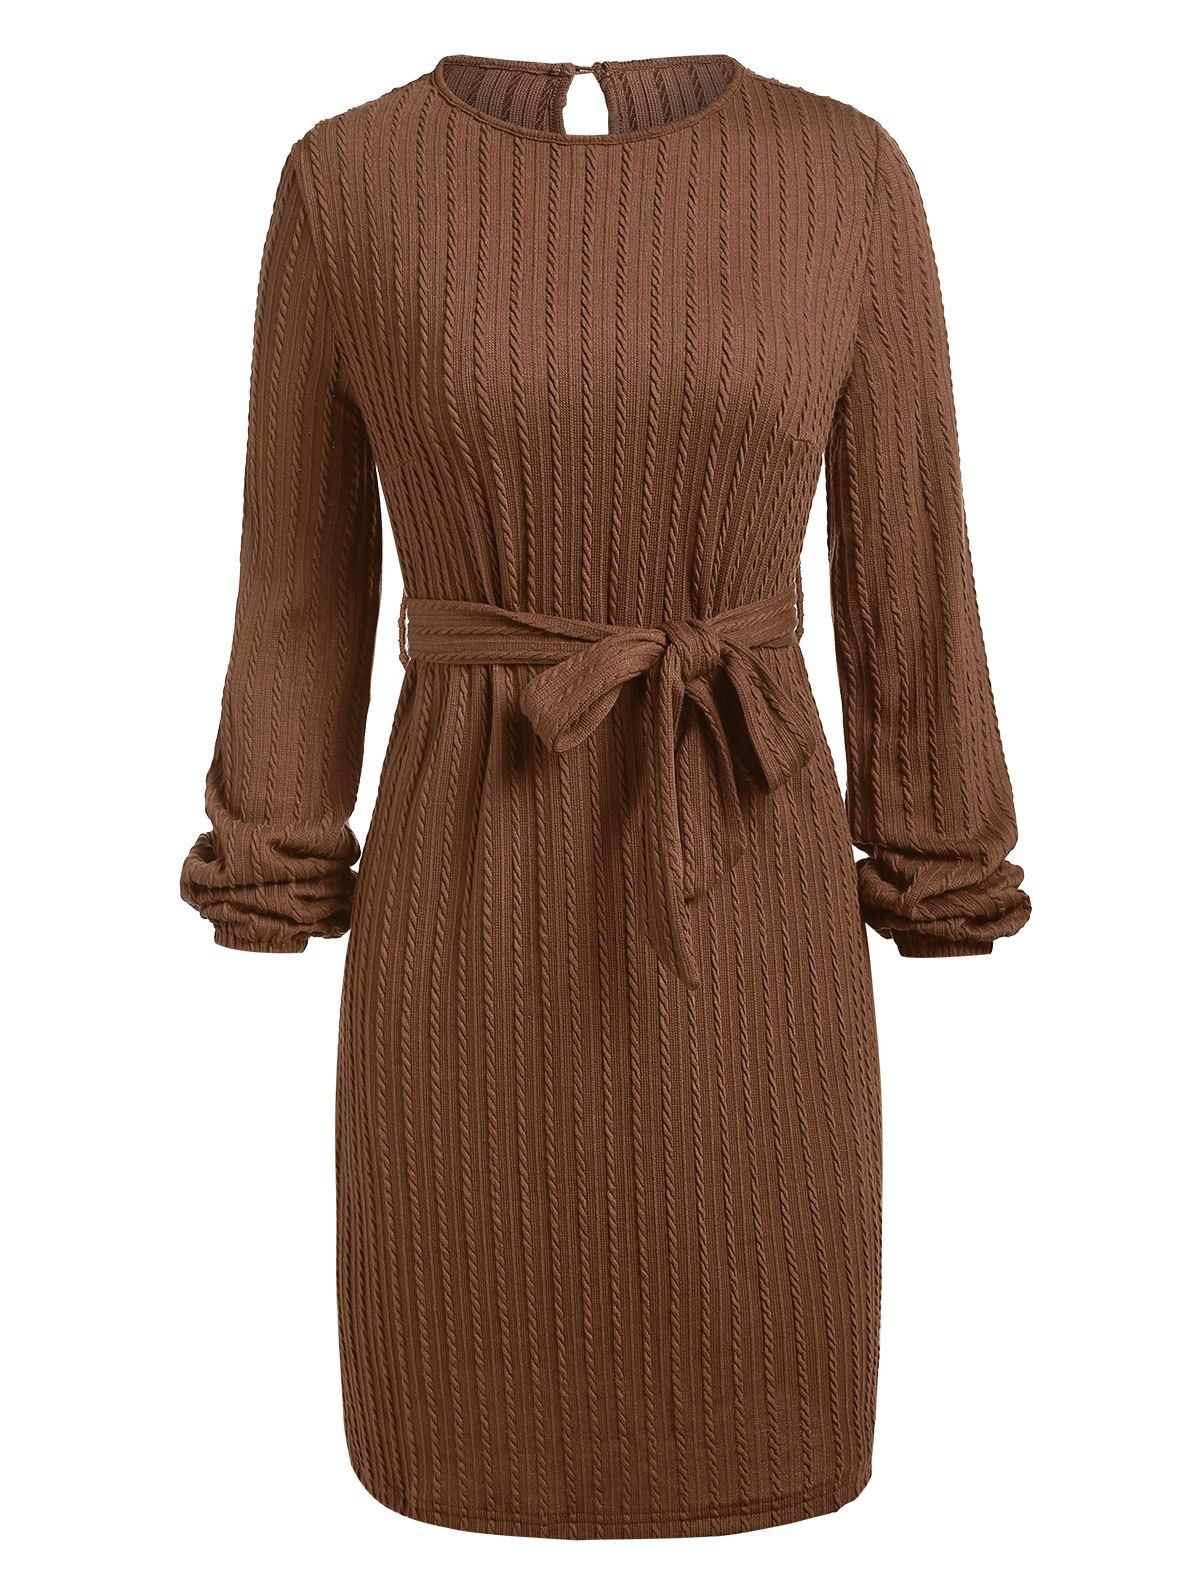 Cable Knit Belted Keyhole Back Mini Dress - COFFEE L